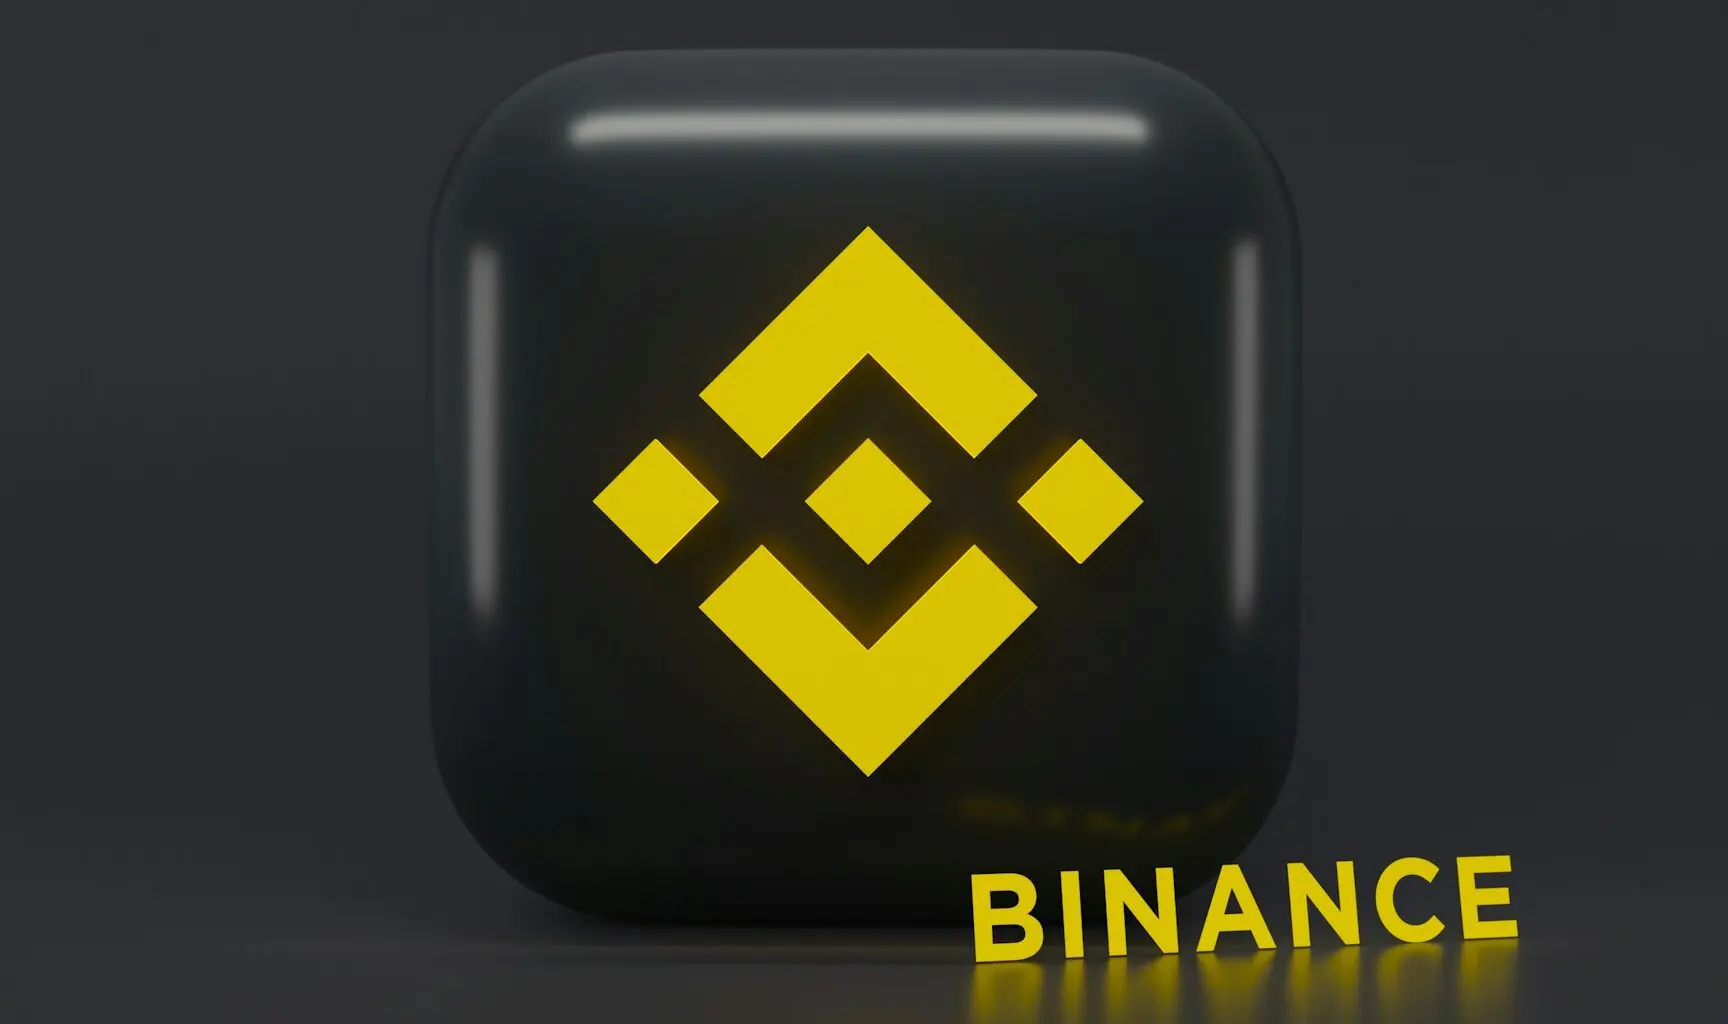 3D rendering of a black cube with the yellow Binance logo on it.